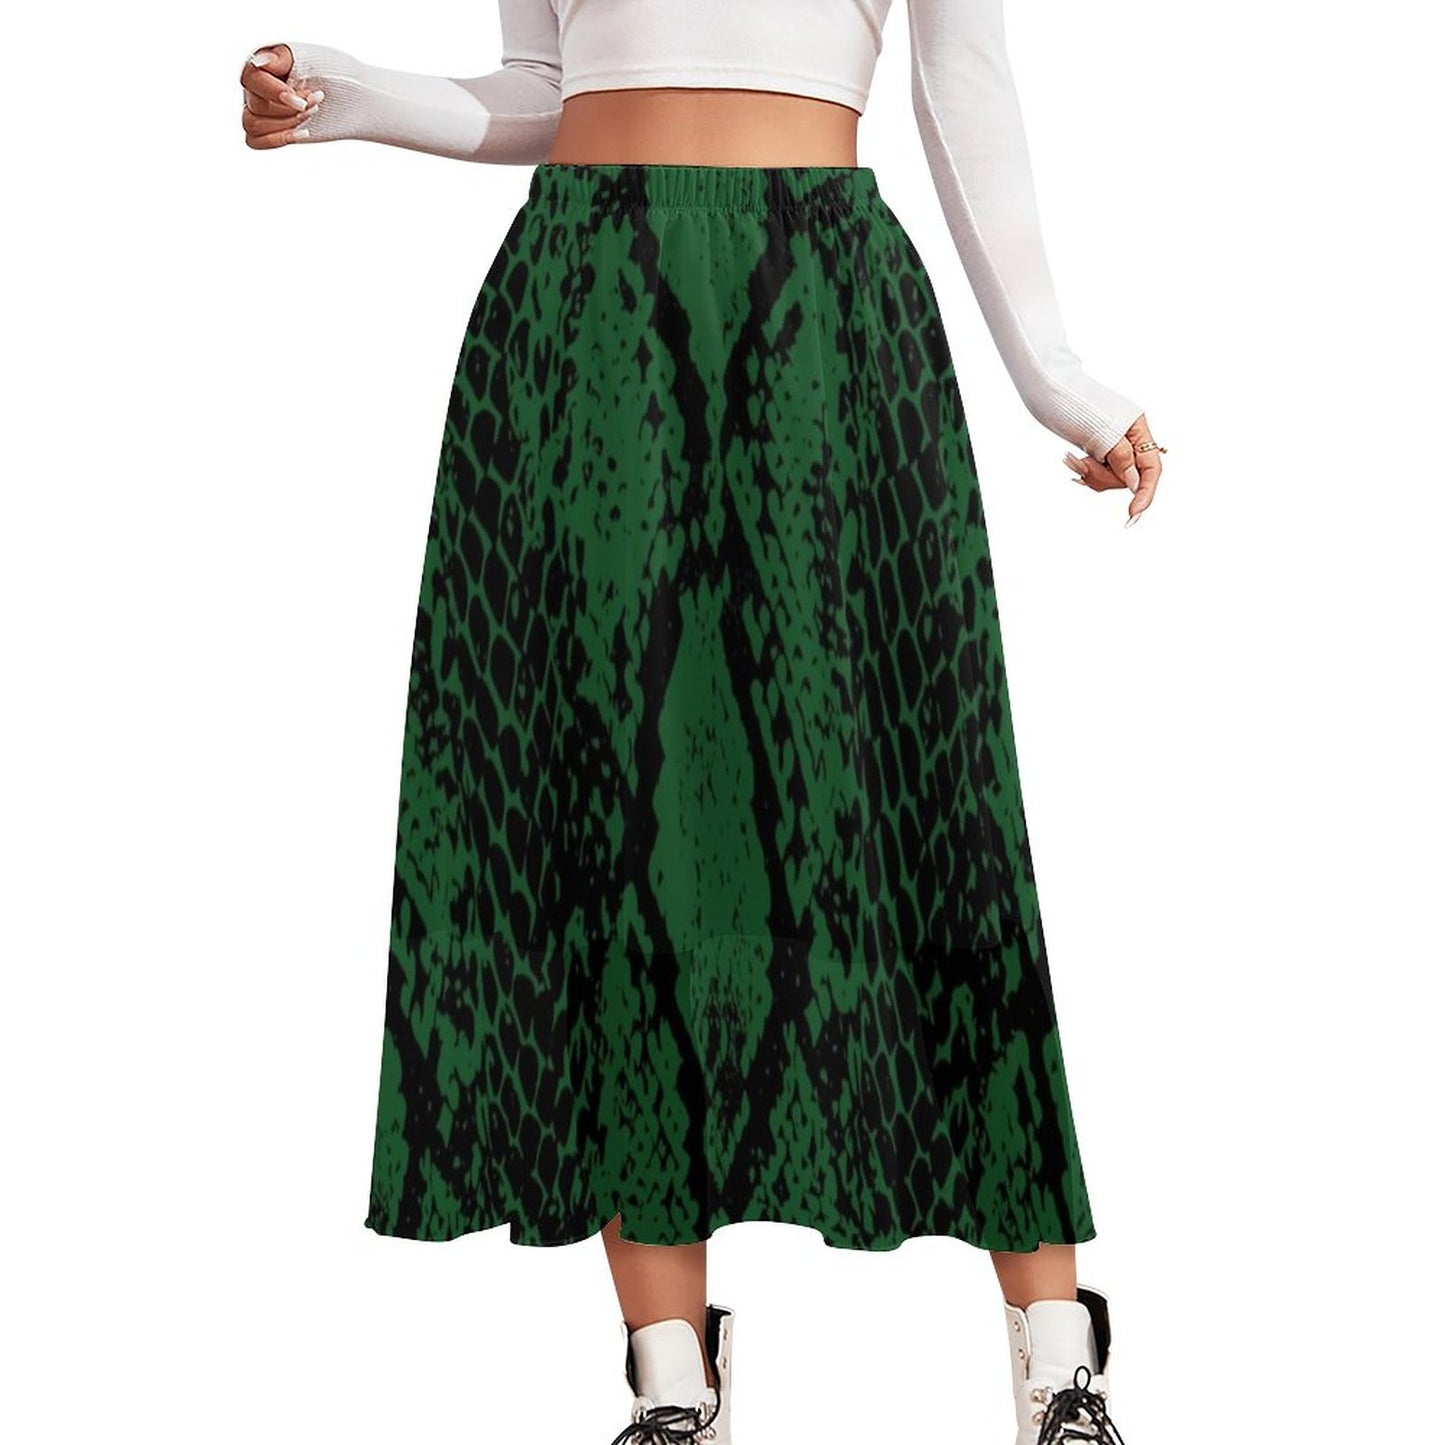 Green Snake Skirt | Snakes Jewelry & Fashion